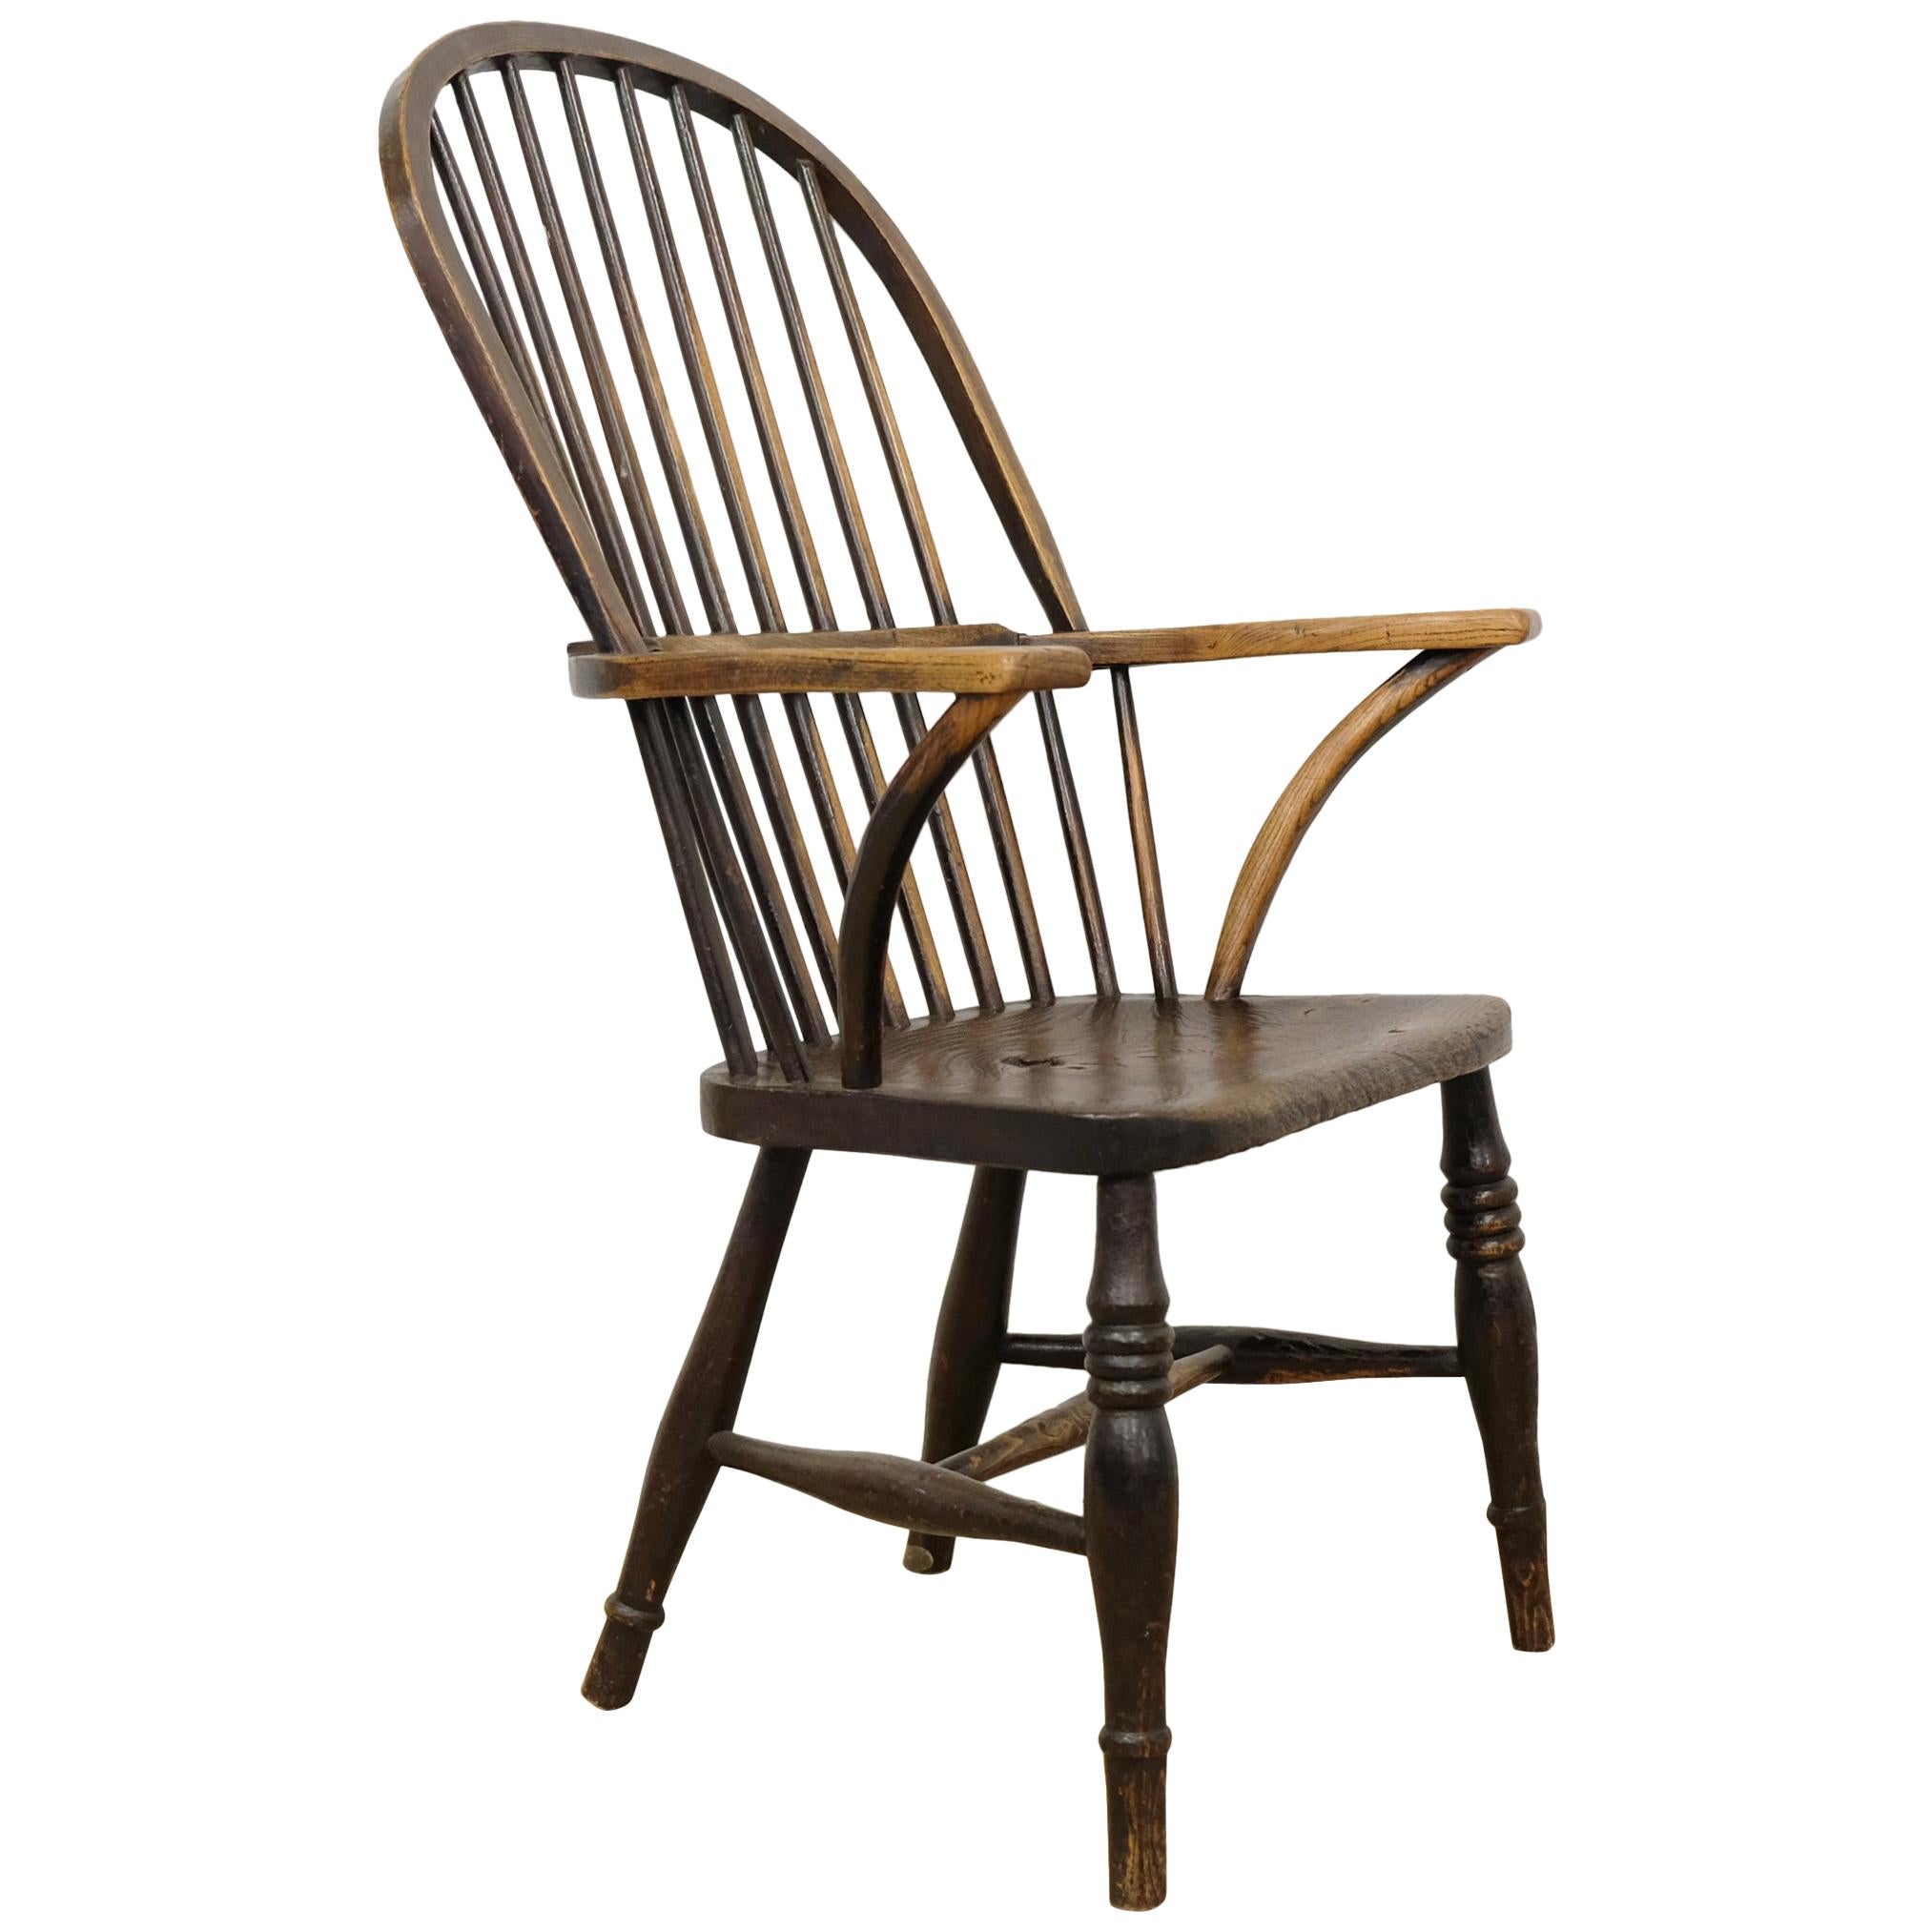 West Country Windsor Armchair, English, Devonshire, Elm and Ash, 1830s Chair